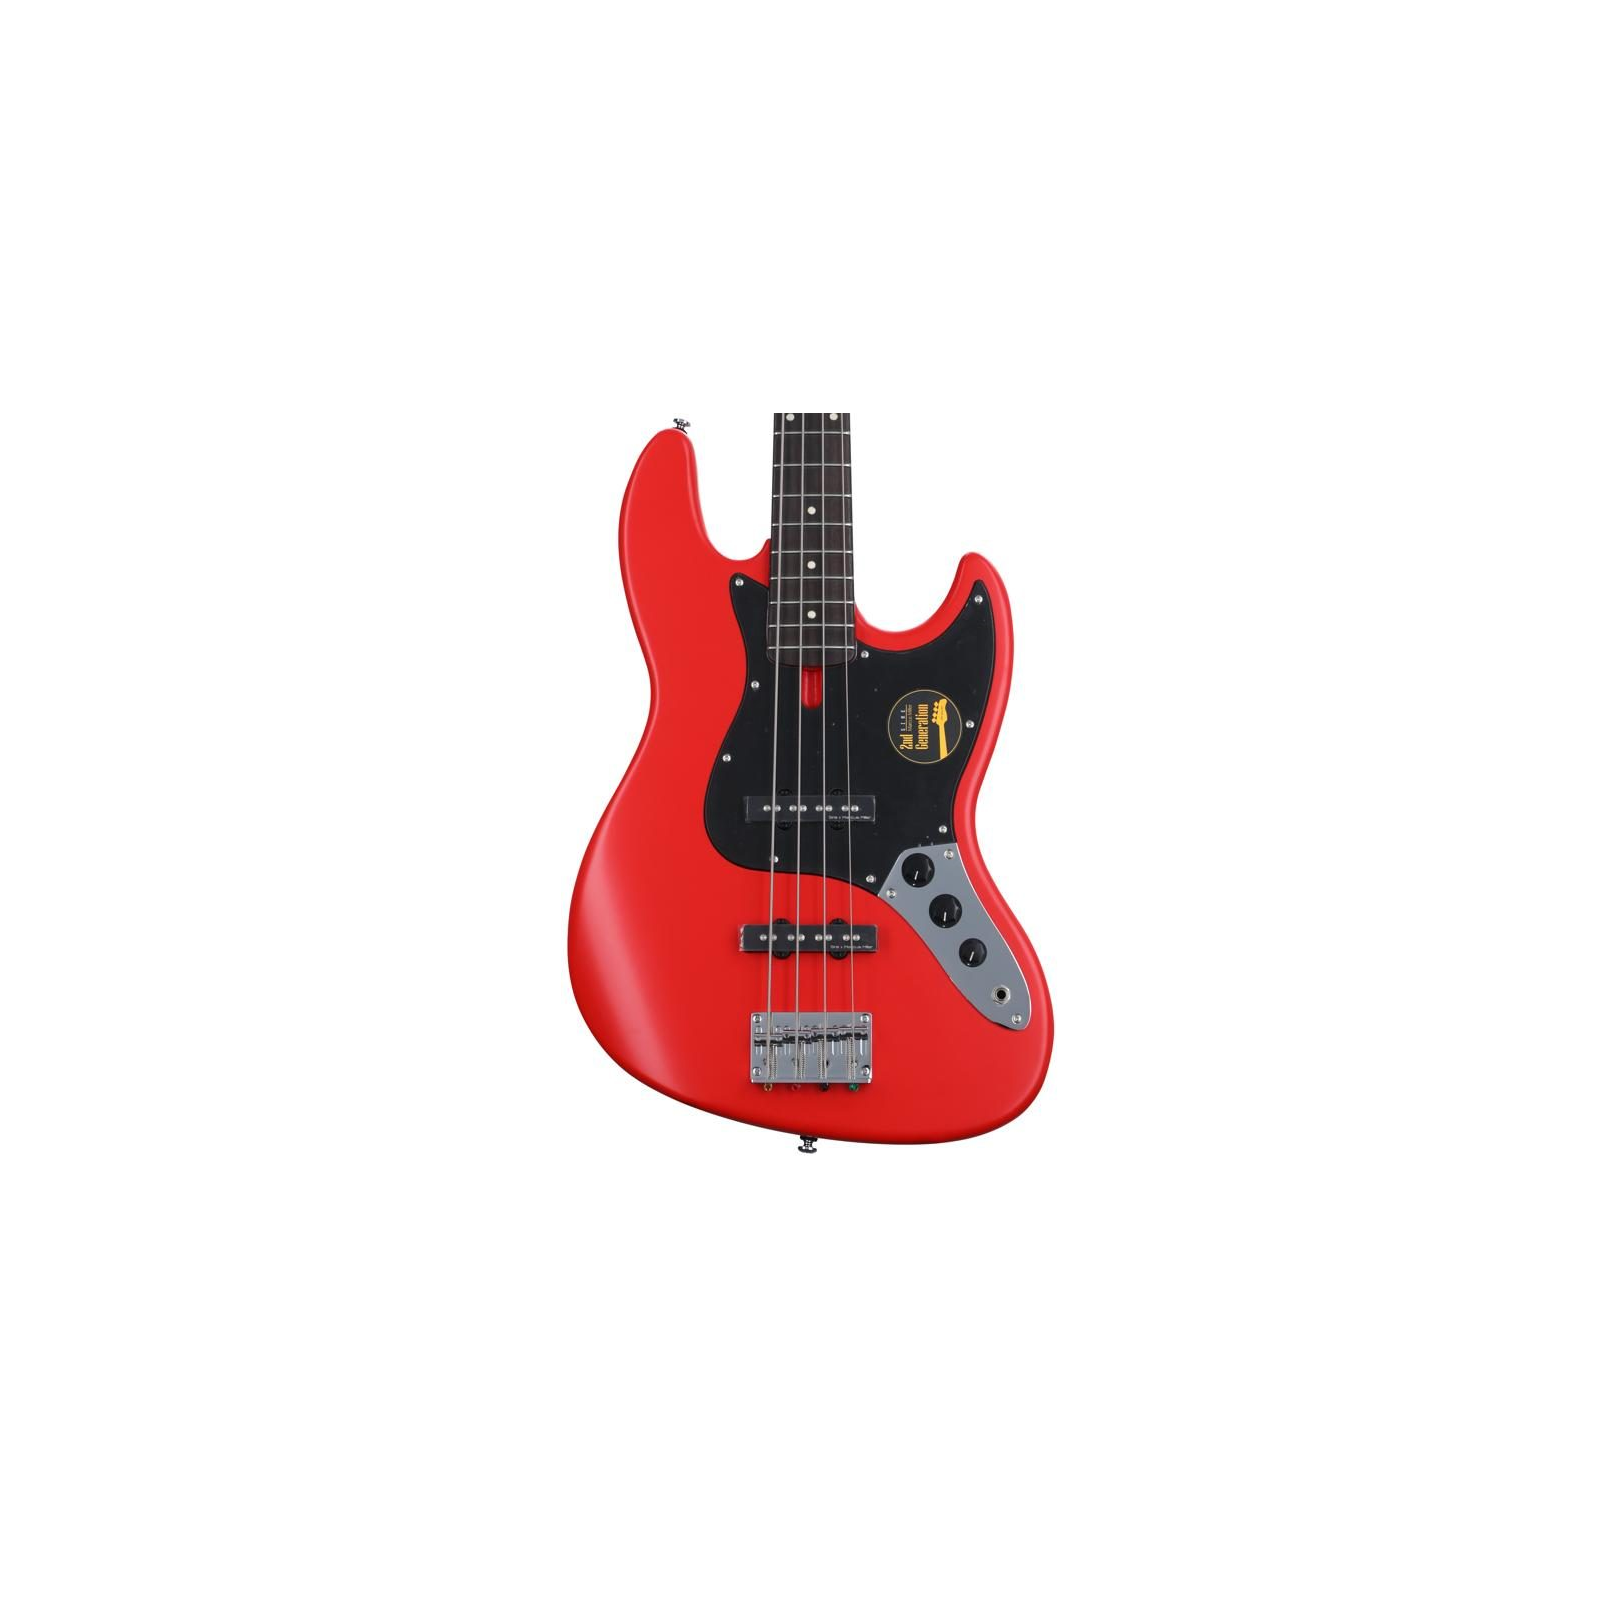 Sire Marcus Miller V3P Passive 4-String Bass, Red Satin